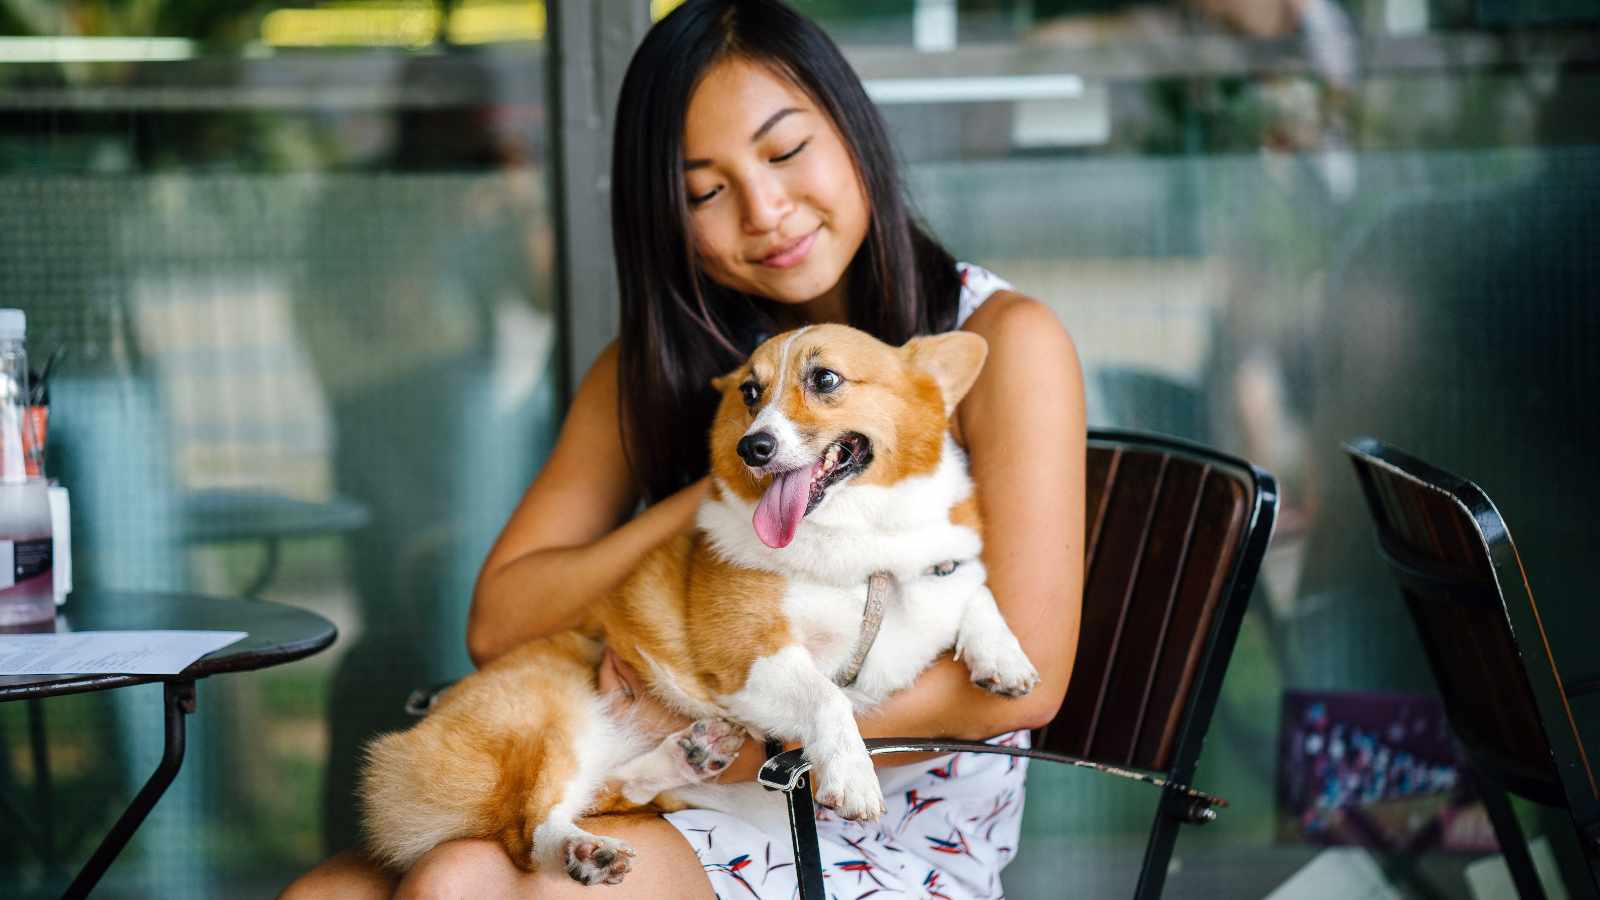 Lady holding a dog in a restaurant